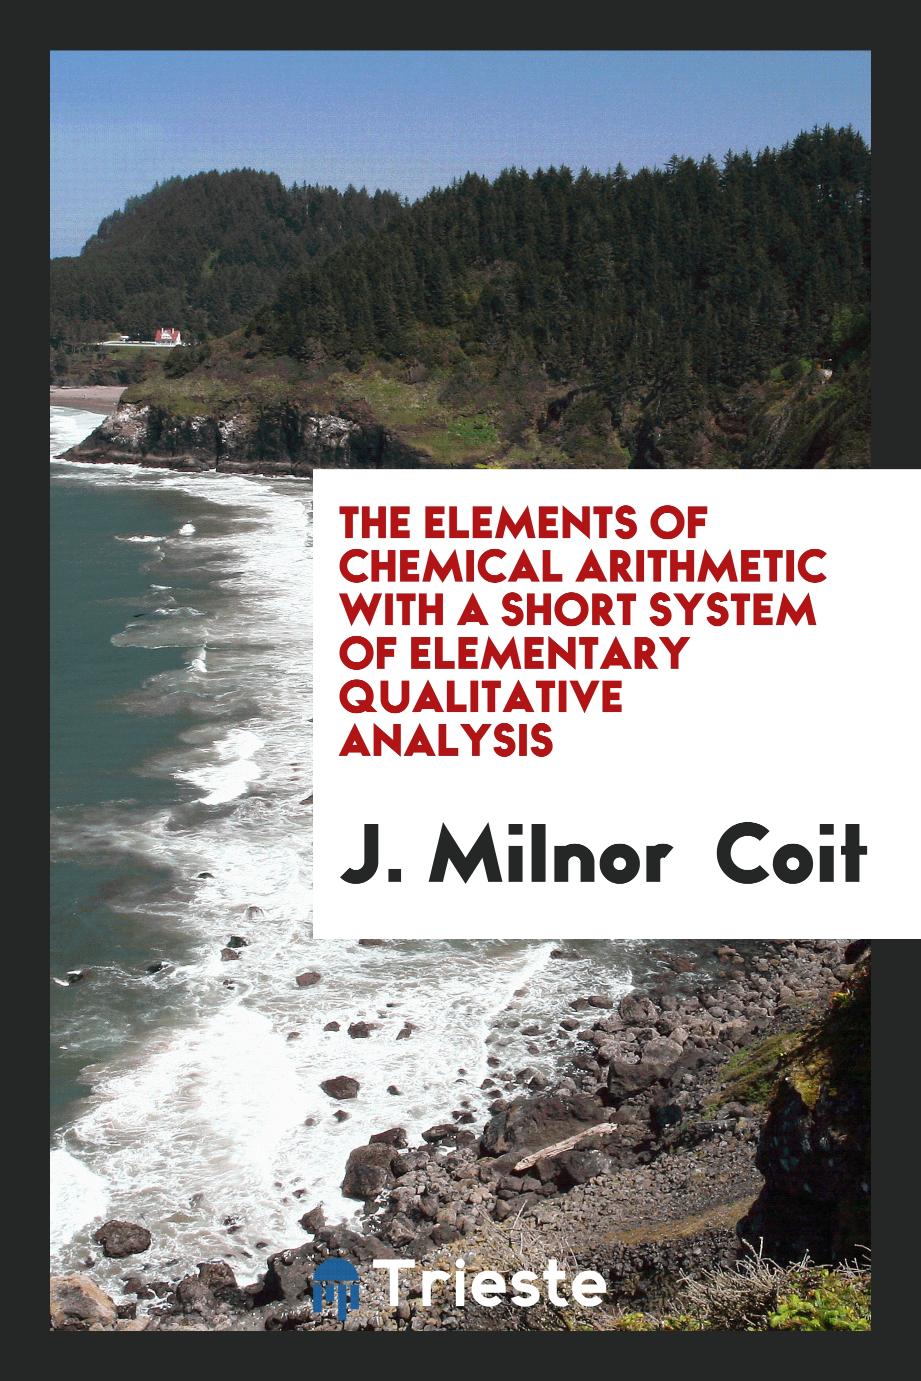 The Elements of Chemical Arithmetic with a Short System of Elementary Qualitative Analysis